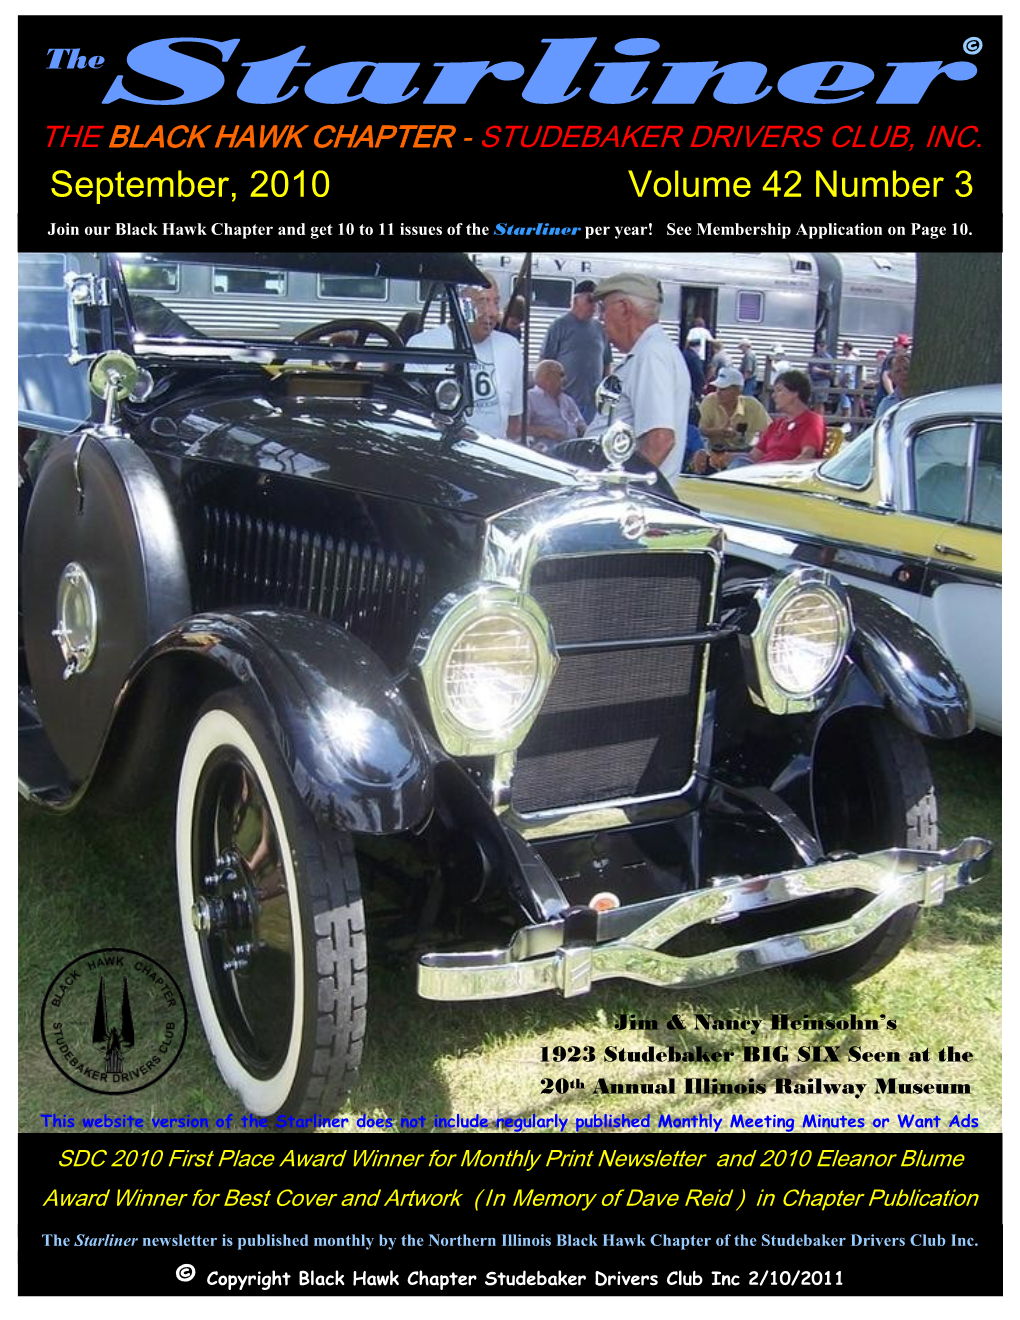 September, 2010 Volume 42 Number 3 Join Our Black Hawk Chapter and Get 10 to 11 Issues of the Starliner Per Year! See Membership Application on Page 10